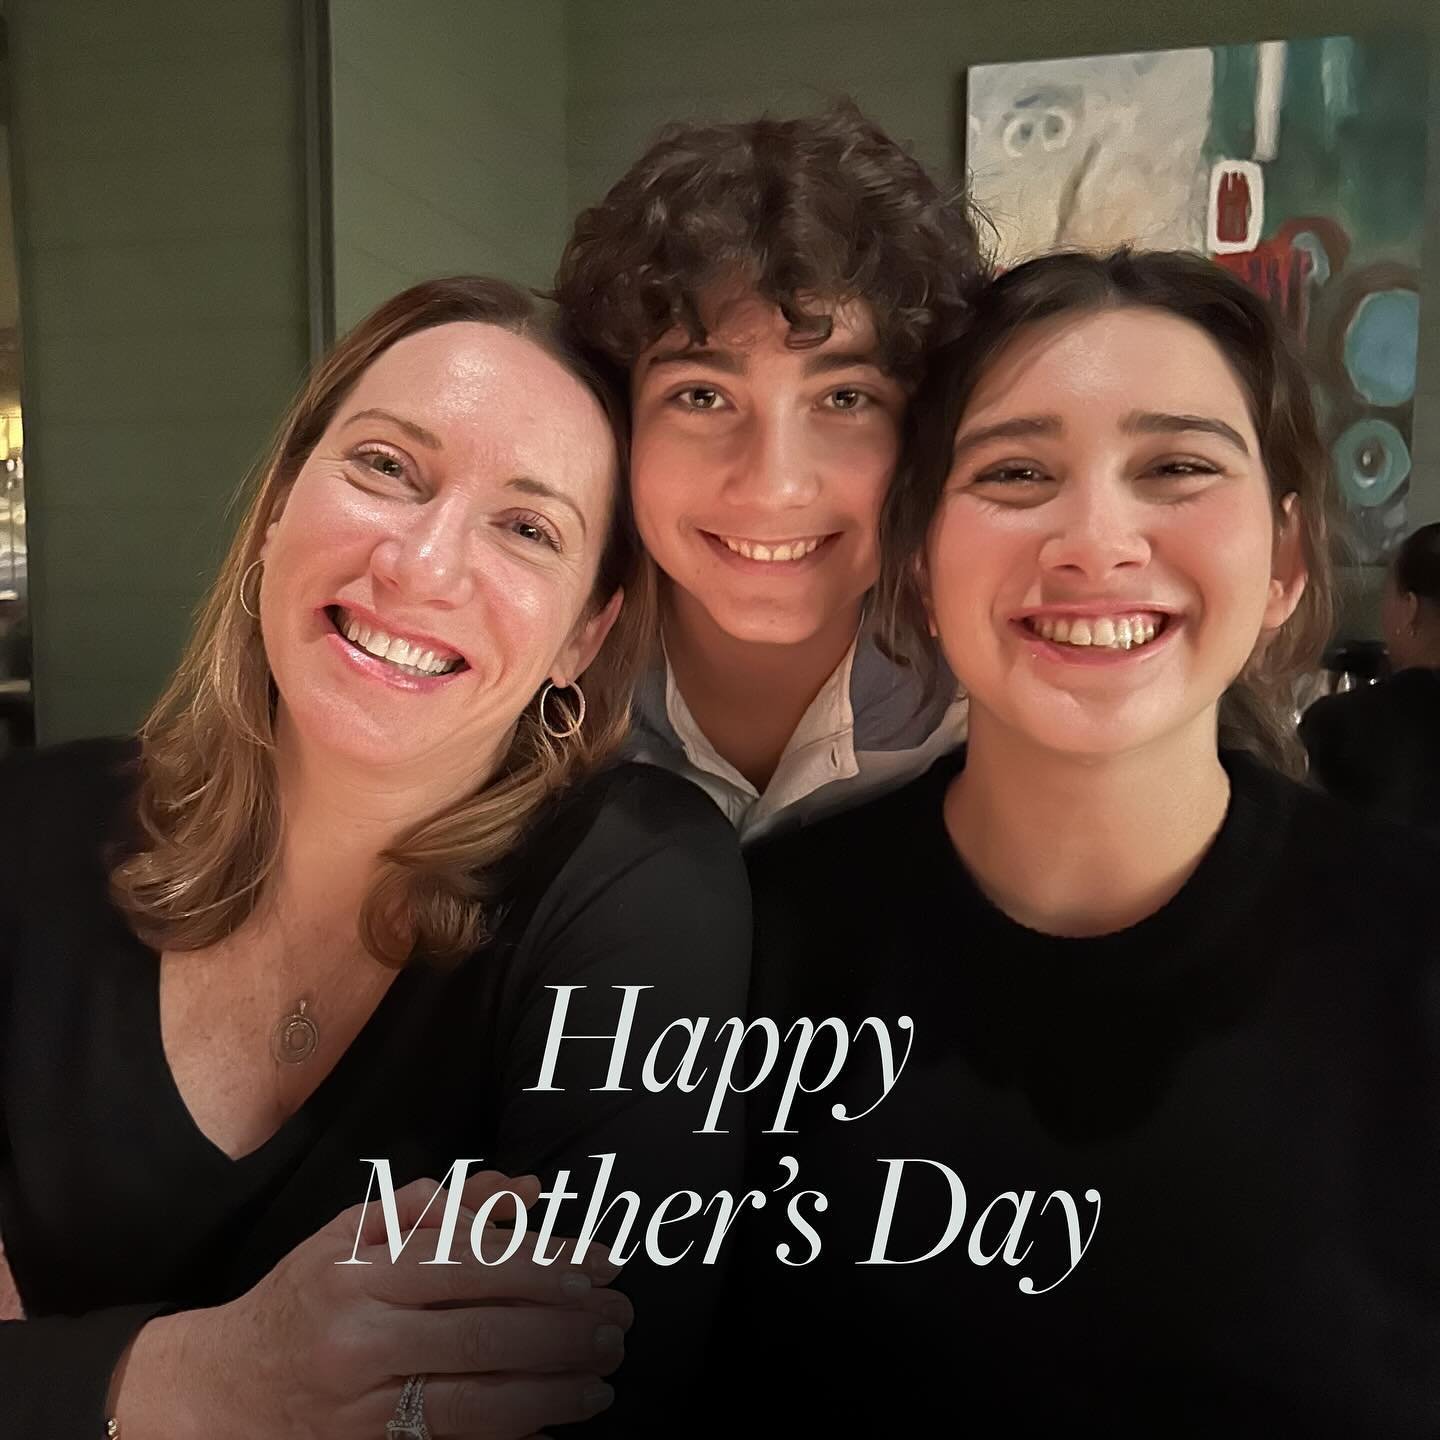 Celebrating our unstoppable #WorkingMoms!&nbsp;💪

The incredible mothers of KWT inspire us daily. Balancing professional&nbsp;aspirations with family commitments is no easy task, yet our amazing moms make it appear effortless. Thank you for demonstr